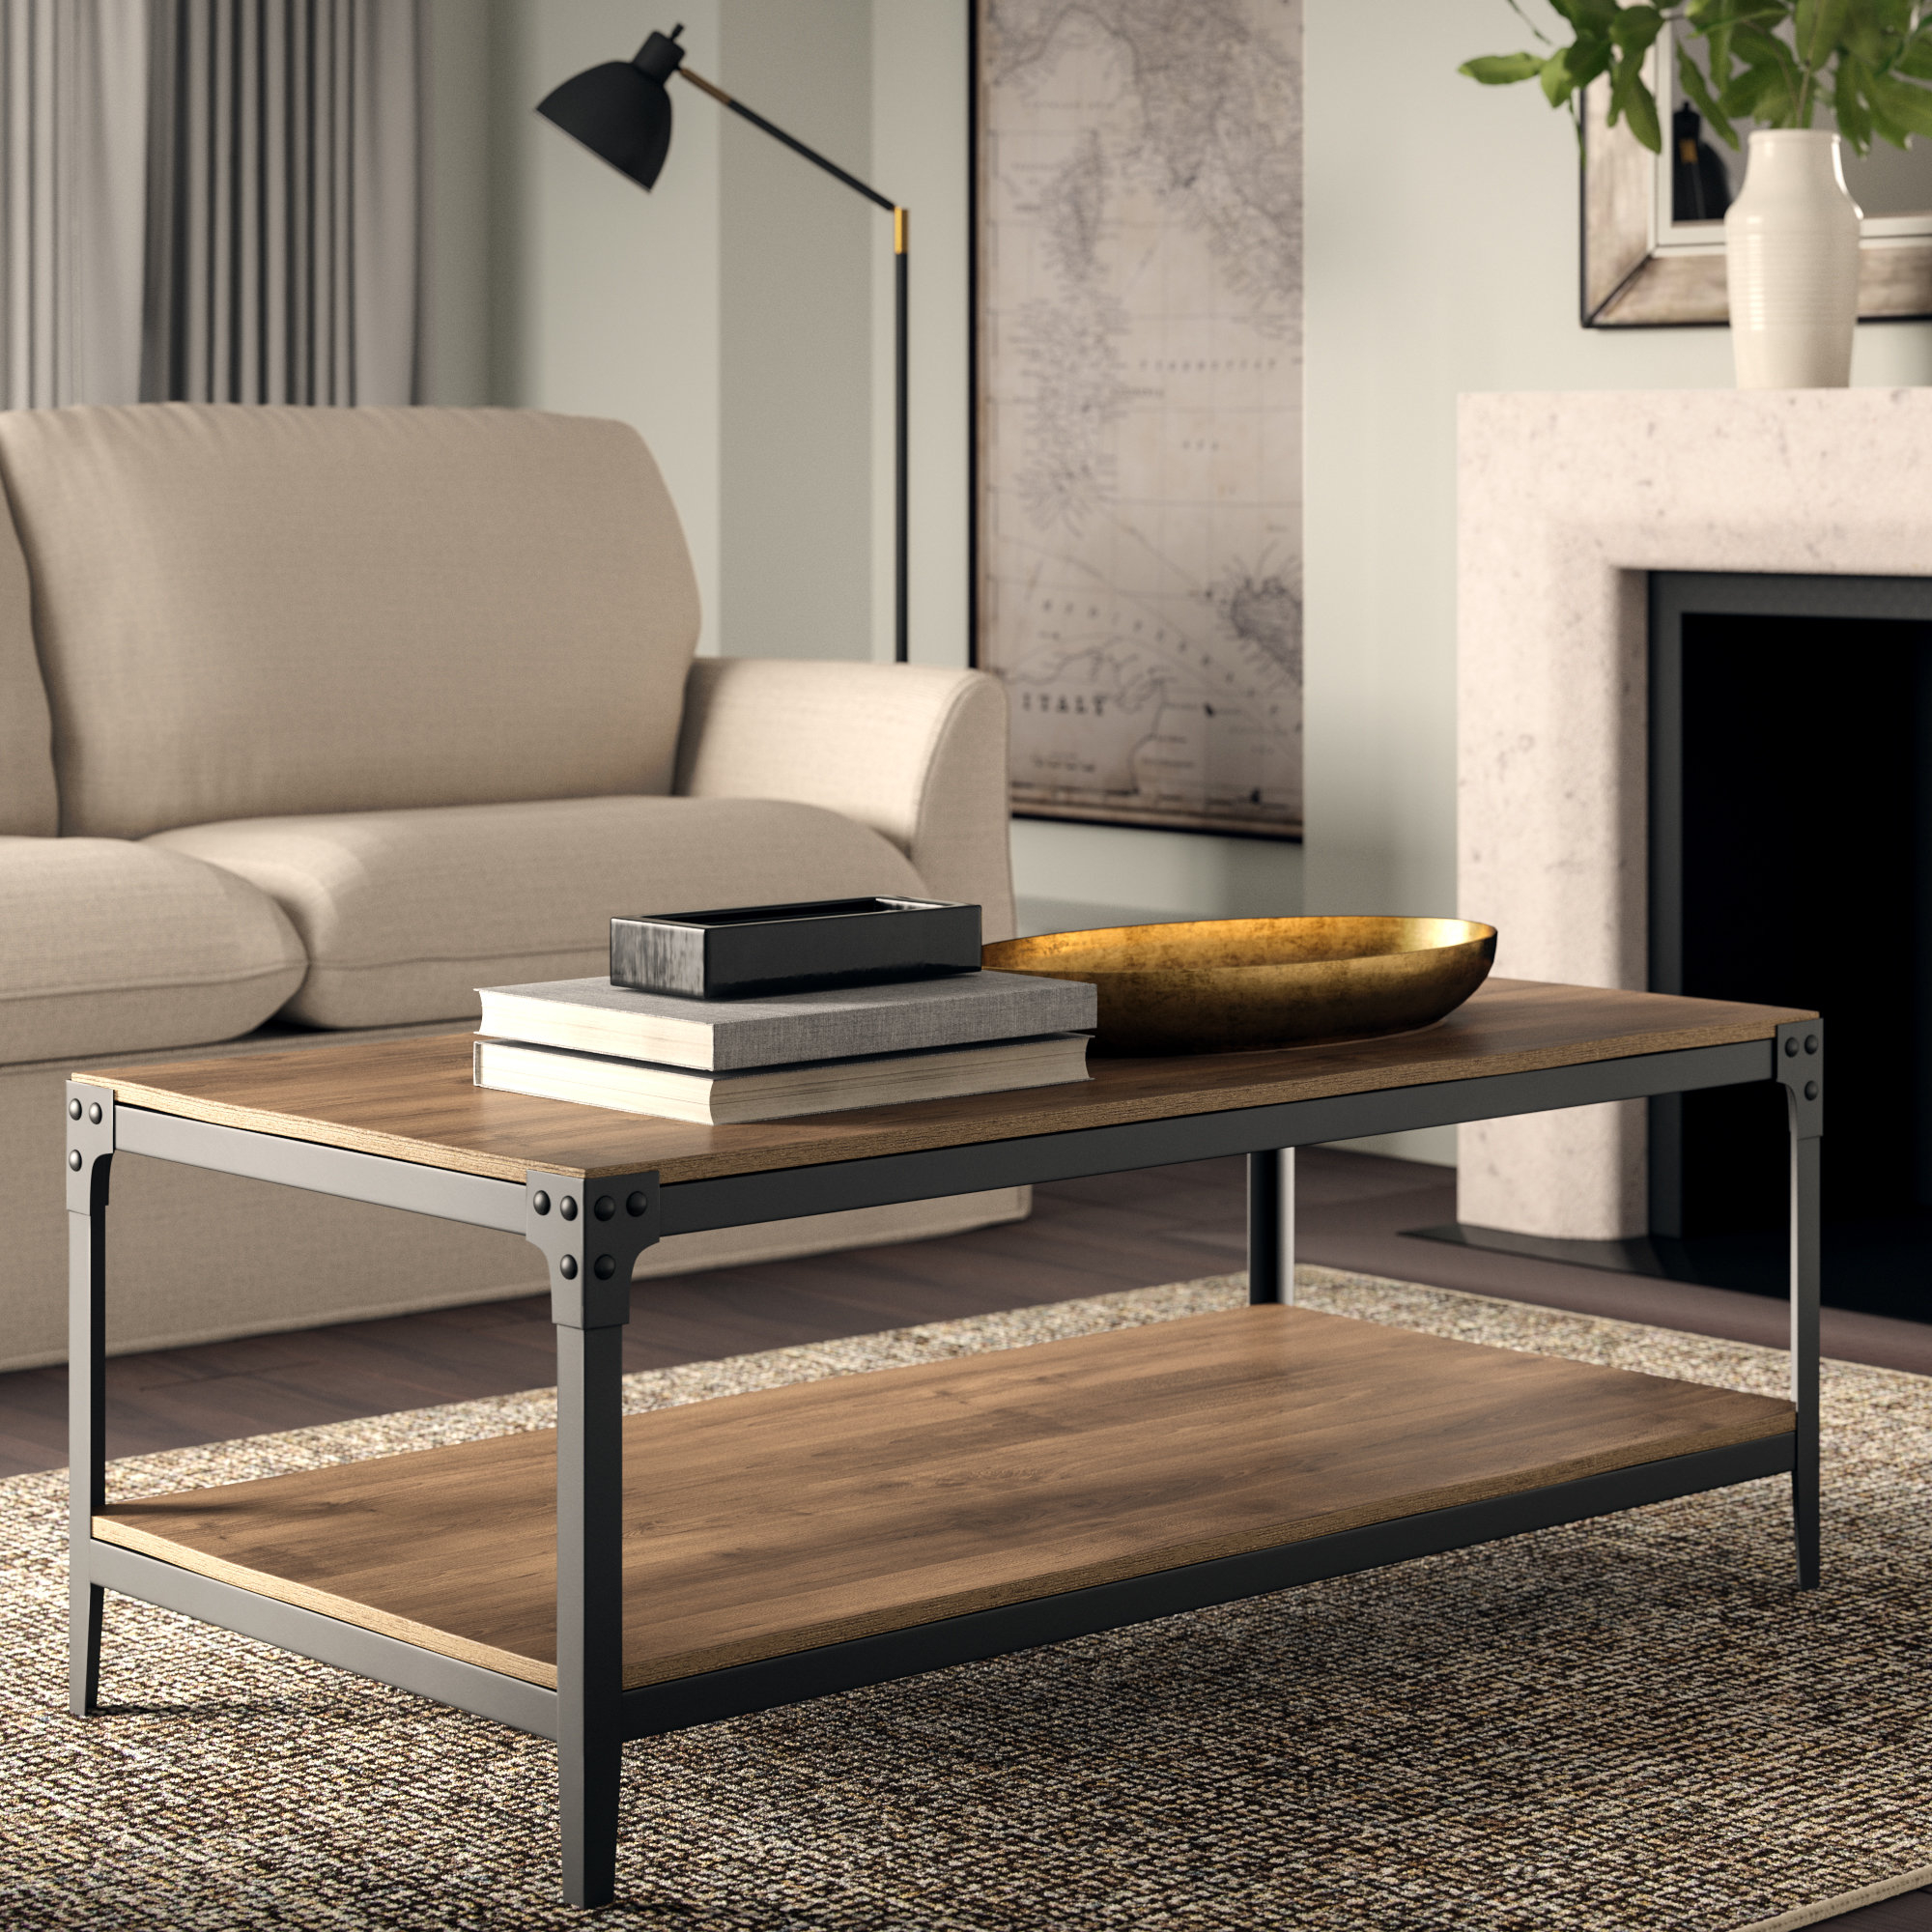 Wayfair Greyleigh Cainsville 3 Piece Coffee Table Set with regard to proportions 2000 X 2000